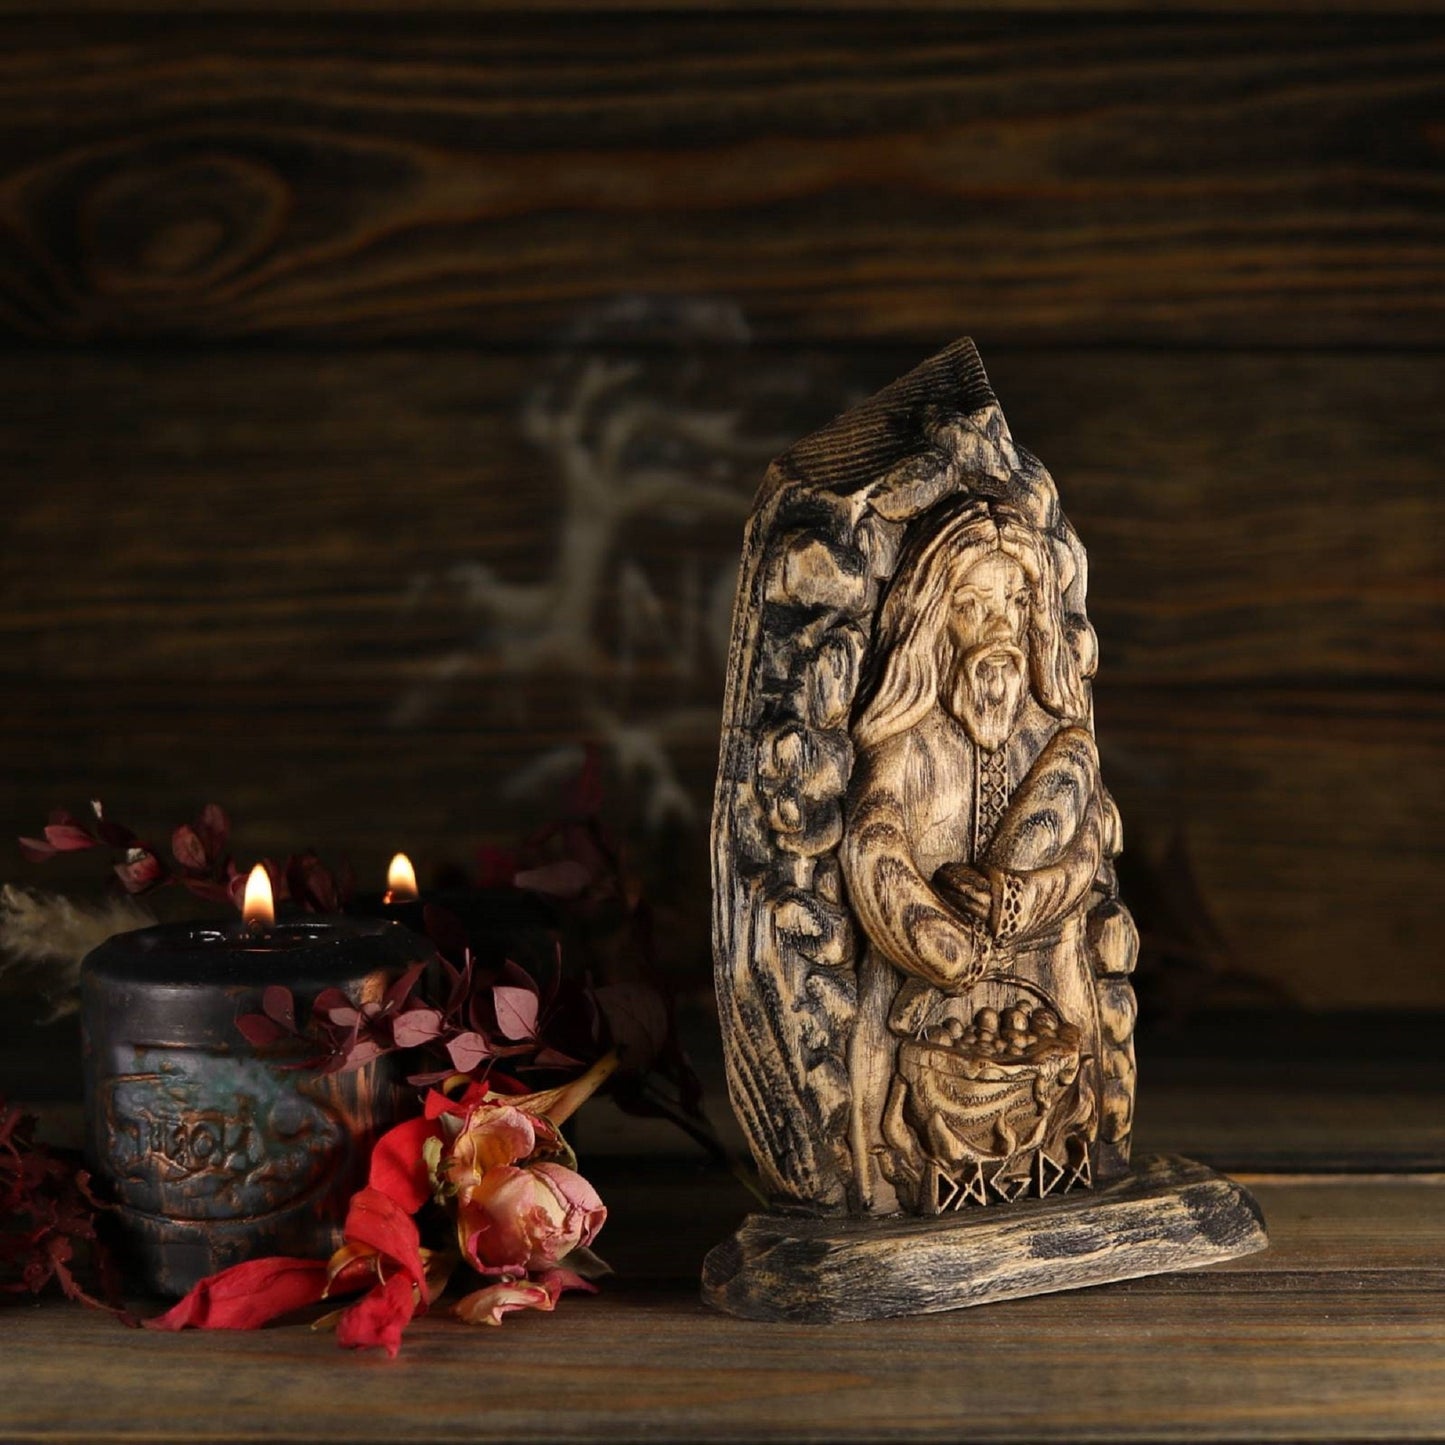 Handcrafted Prosperity: The Dagda Statue of Wealth and Abundance in Norse Pagan Style